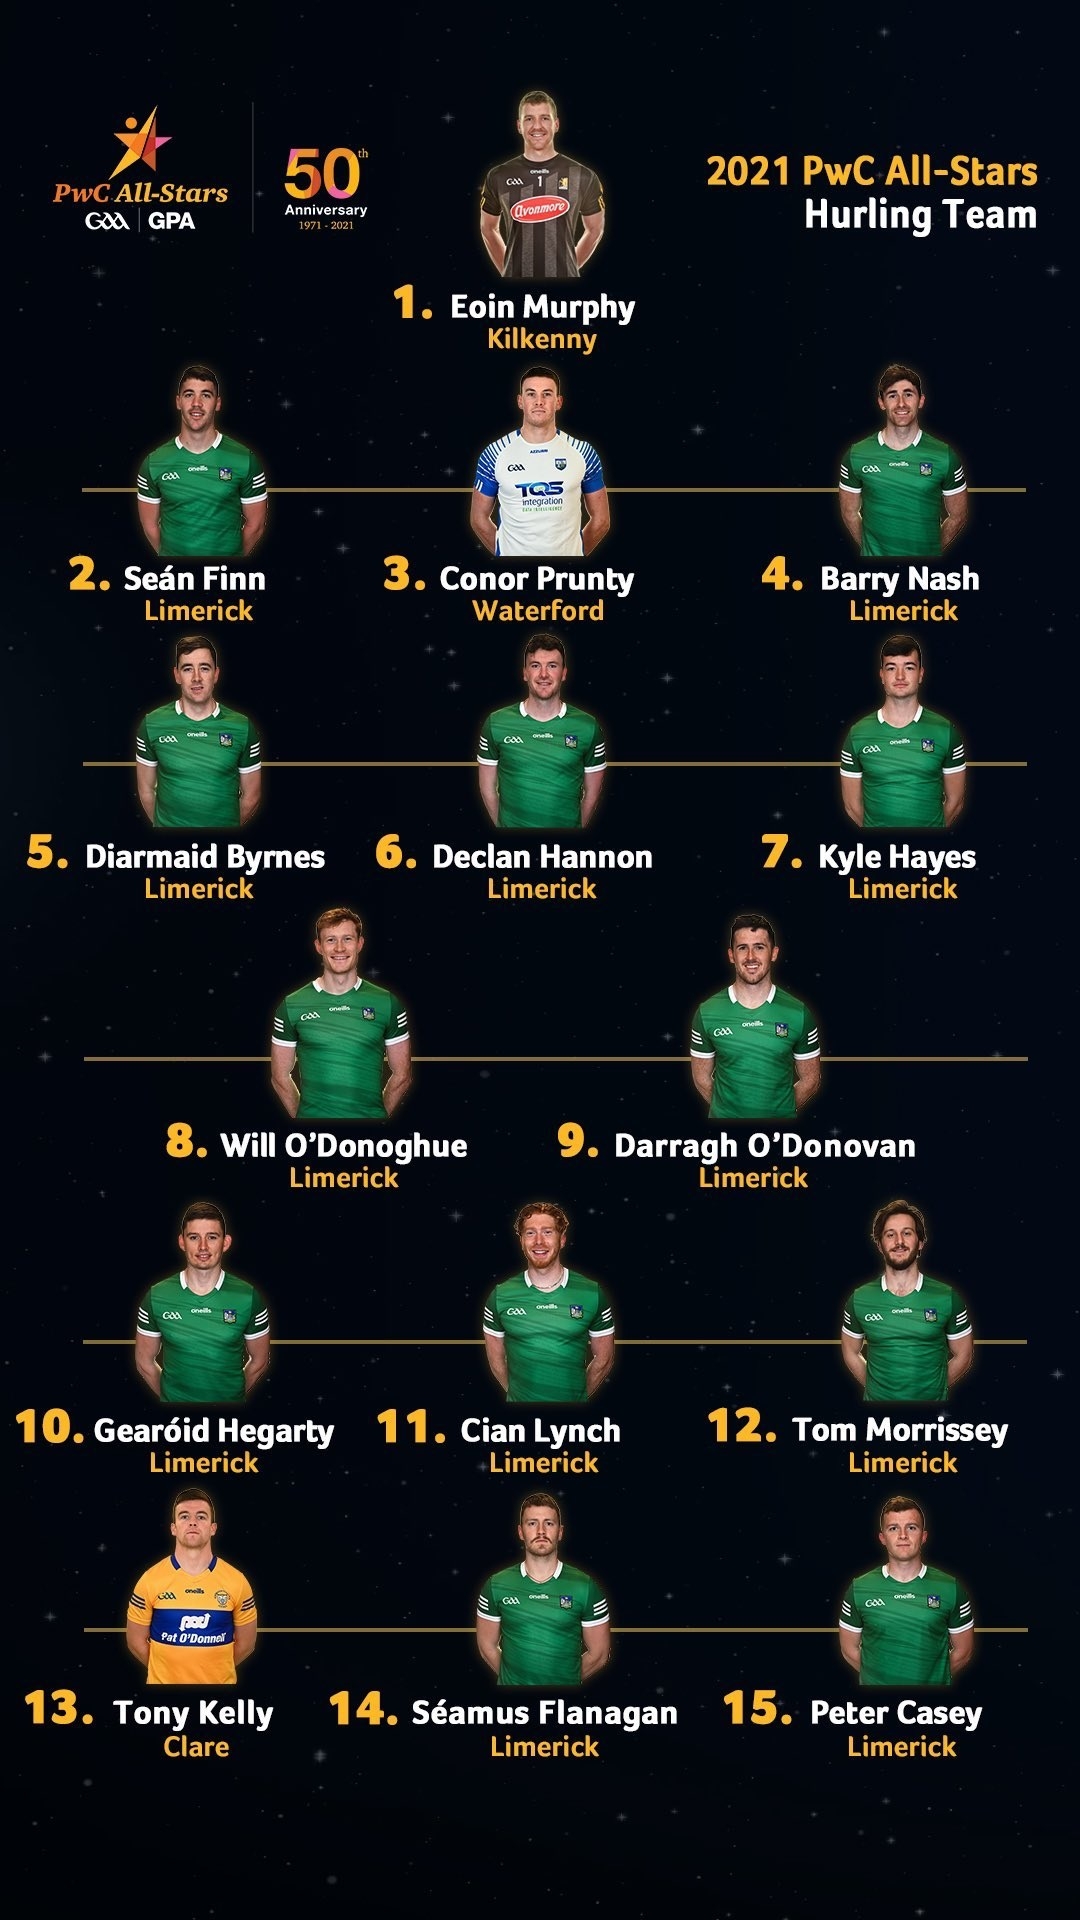 limerick hurlers all star In another impressive accomplishment, the Hurler of the Year Award will go to one of three Limerick nominees - Sean Finn, Cian Lynch or Kyle Hayes.